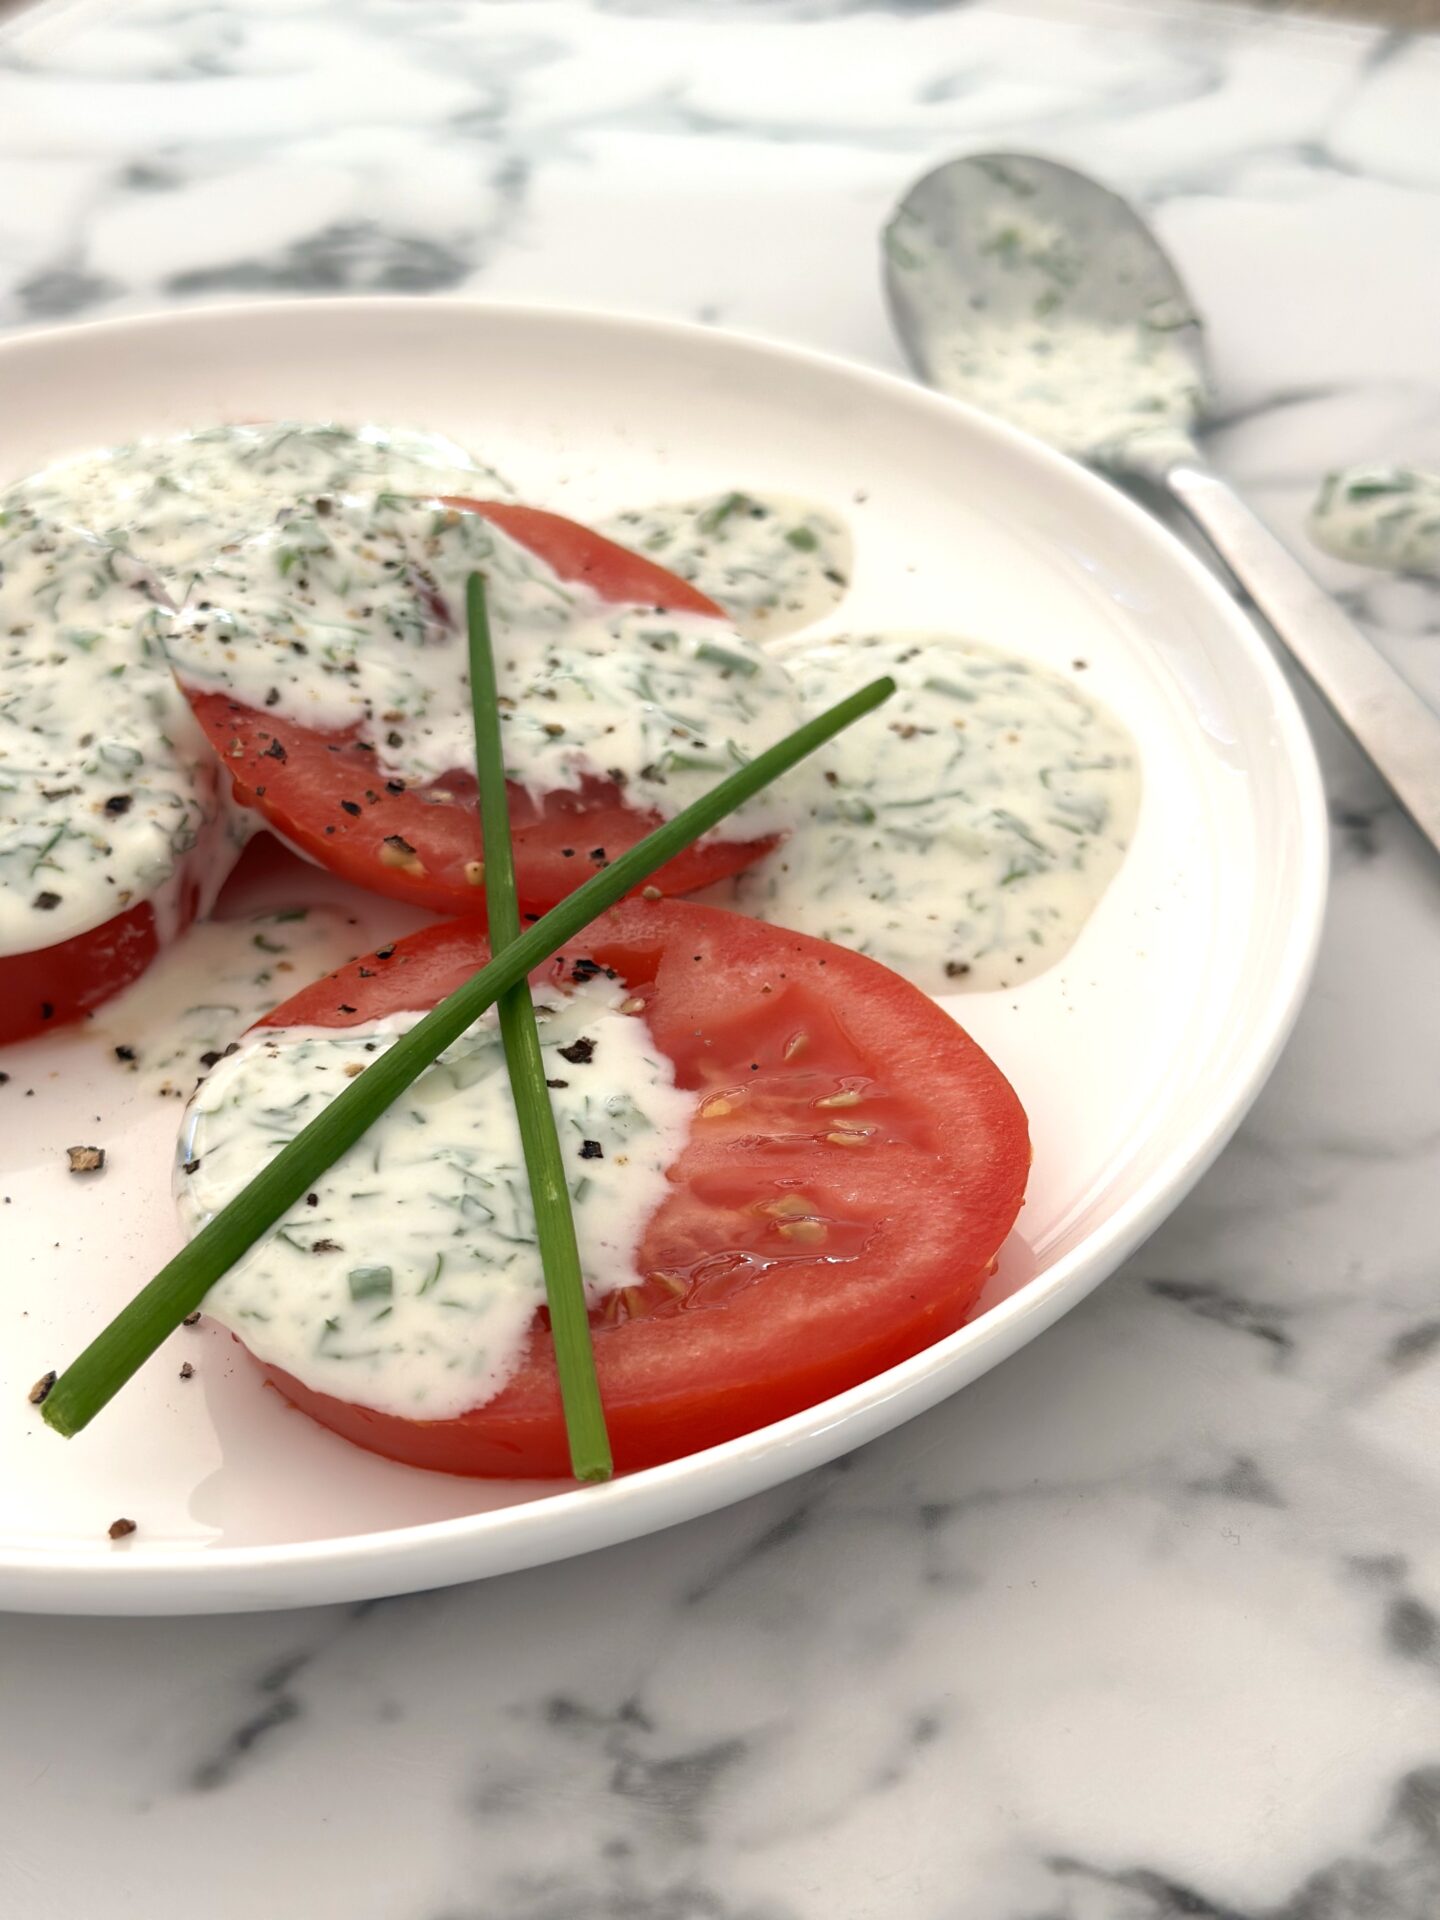 Plate of tomato slices with generous dollops of homemade buttermilk and herb ranch dressing